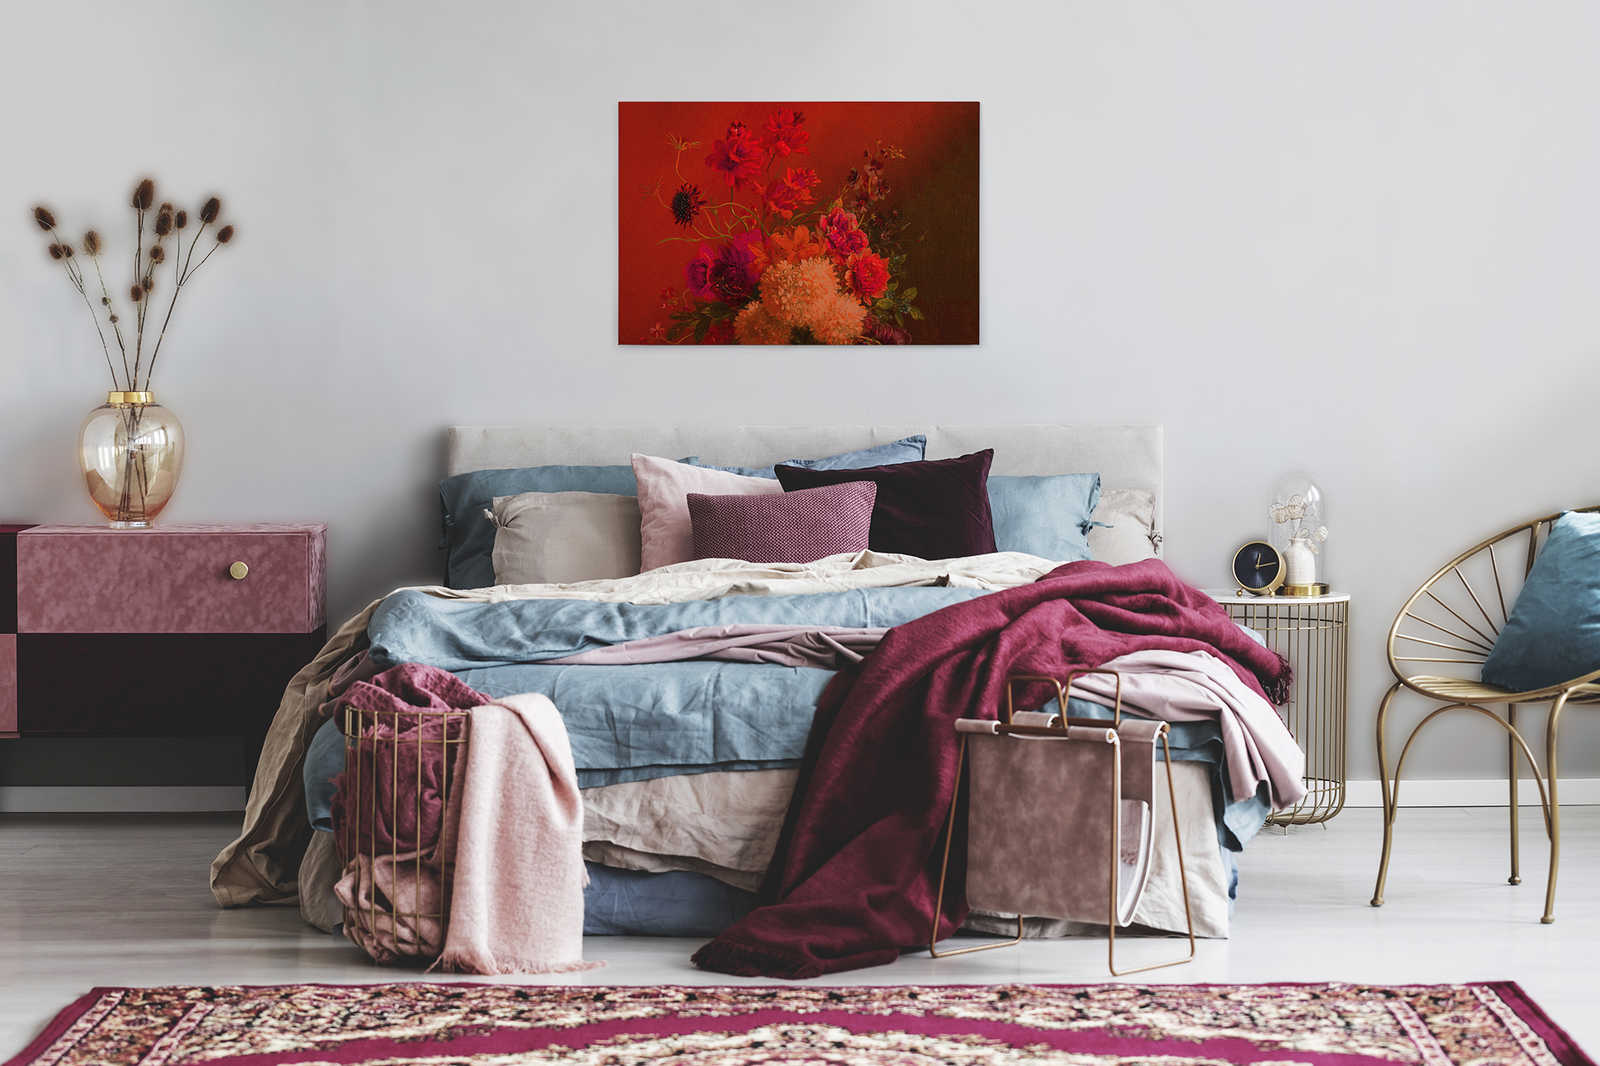             Neon Canvas Painting with Flowers Still Life | walls by patel - 0.90 m x 0.60 m
        